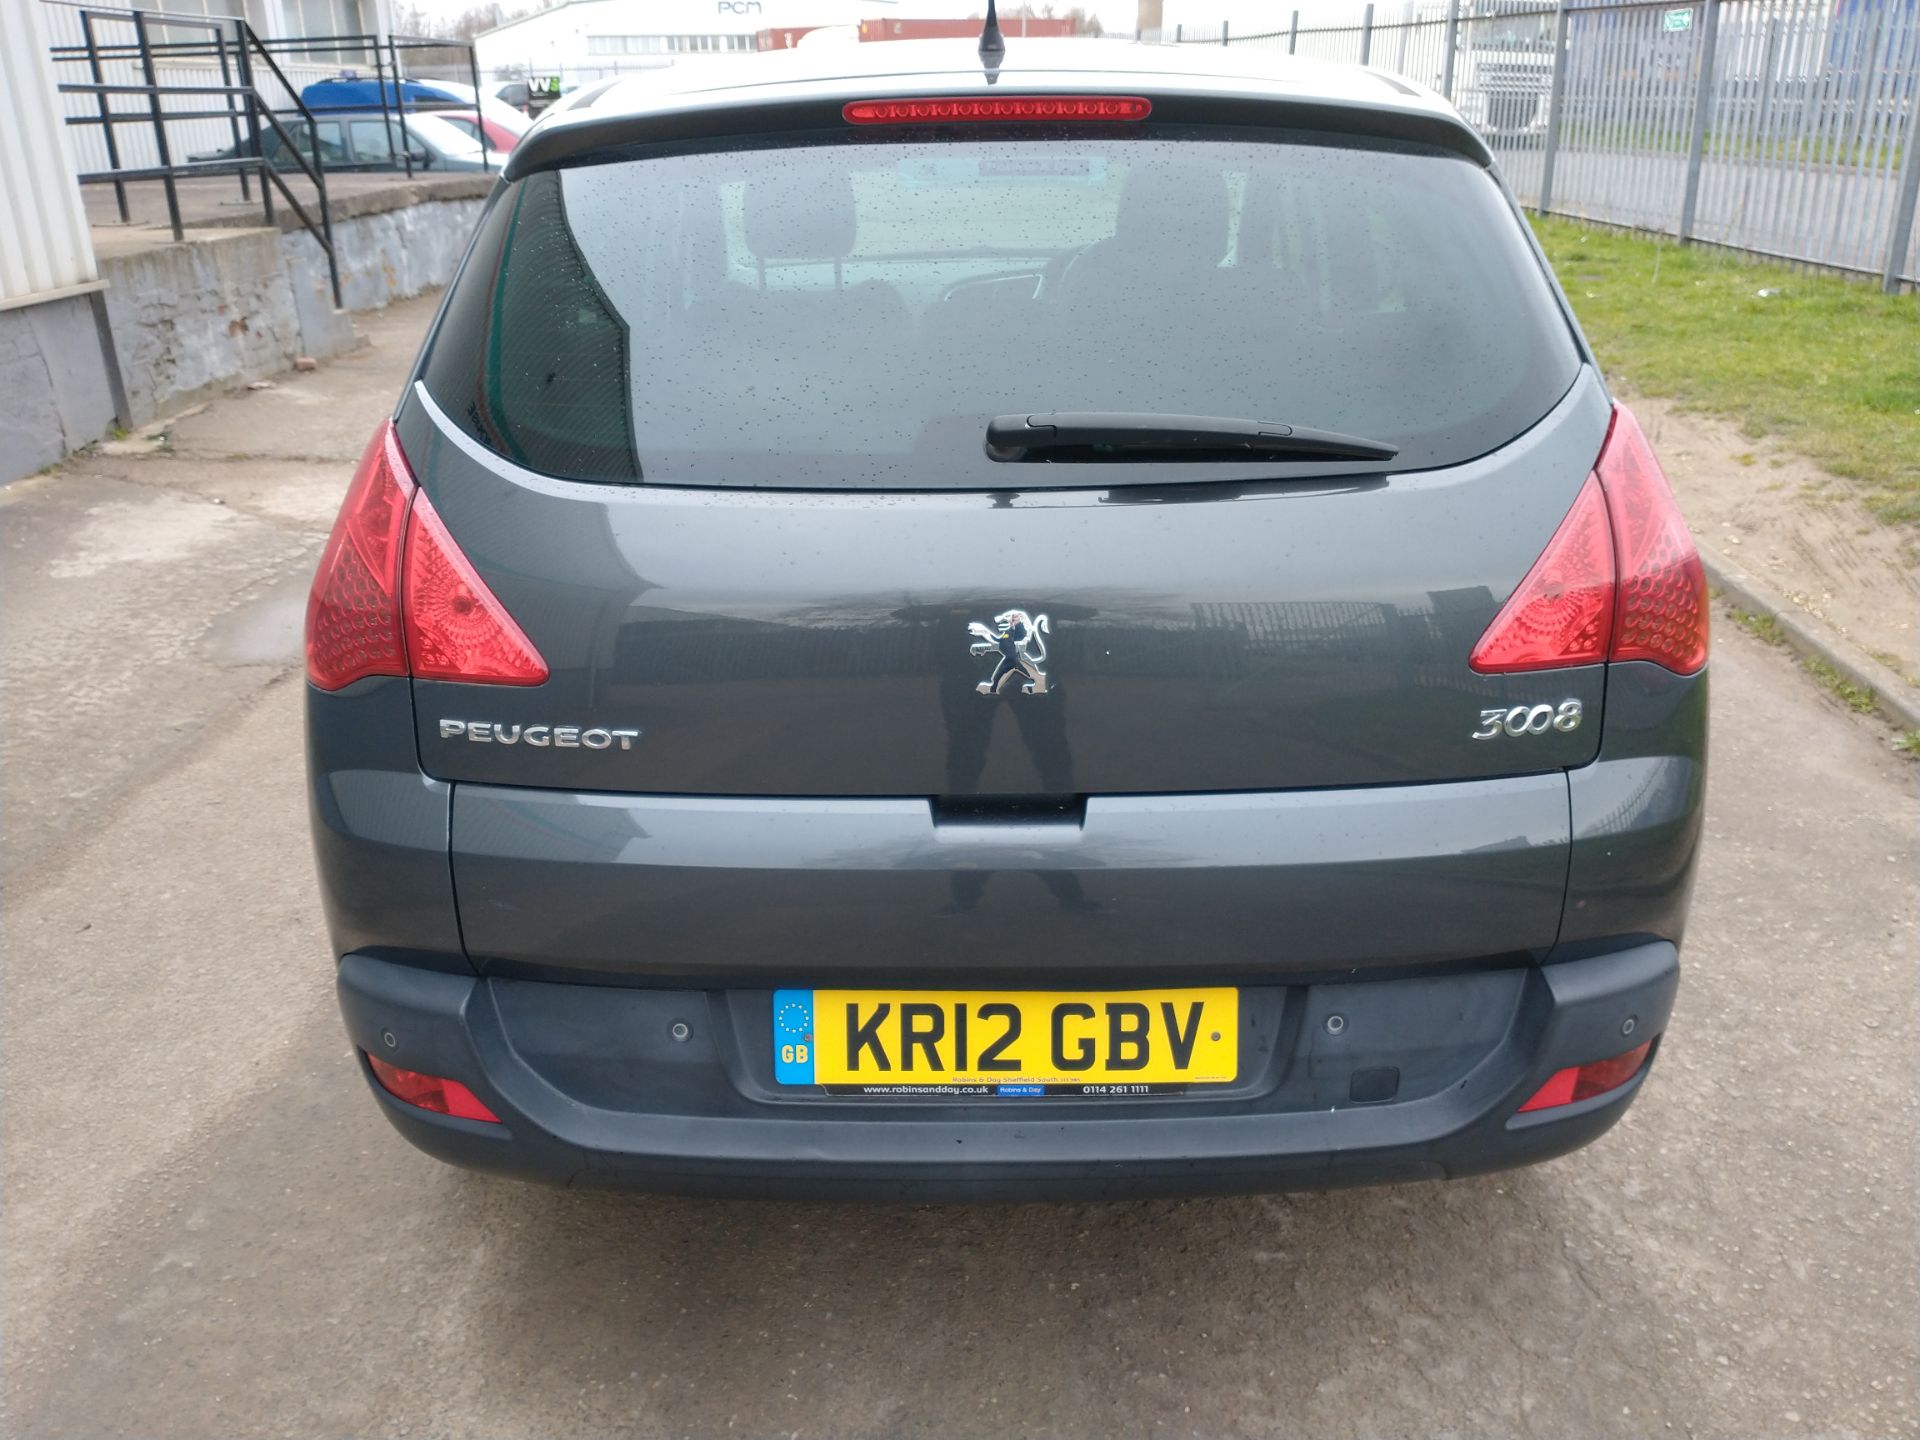 2012 Peugeot 3008 Active HDI 1.6 5DR SUV - CL505 - NO VAT ON THE HAMM - Image 10 of 19